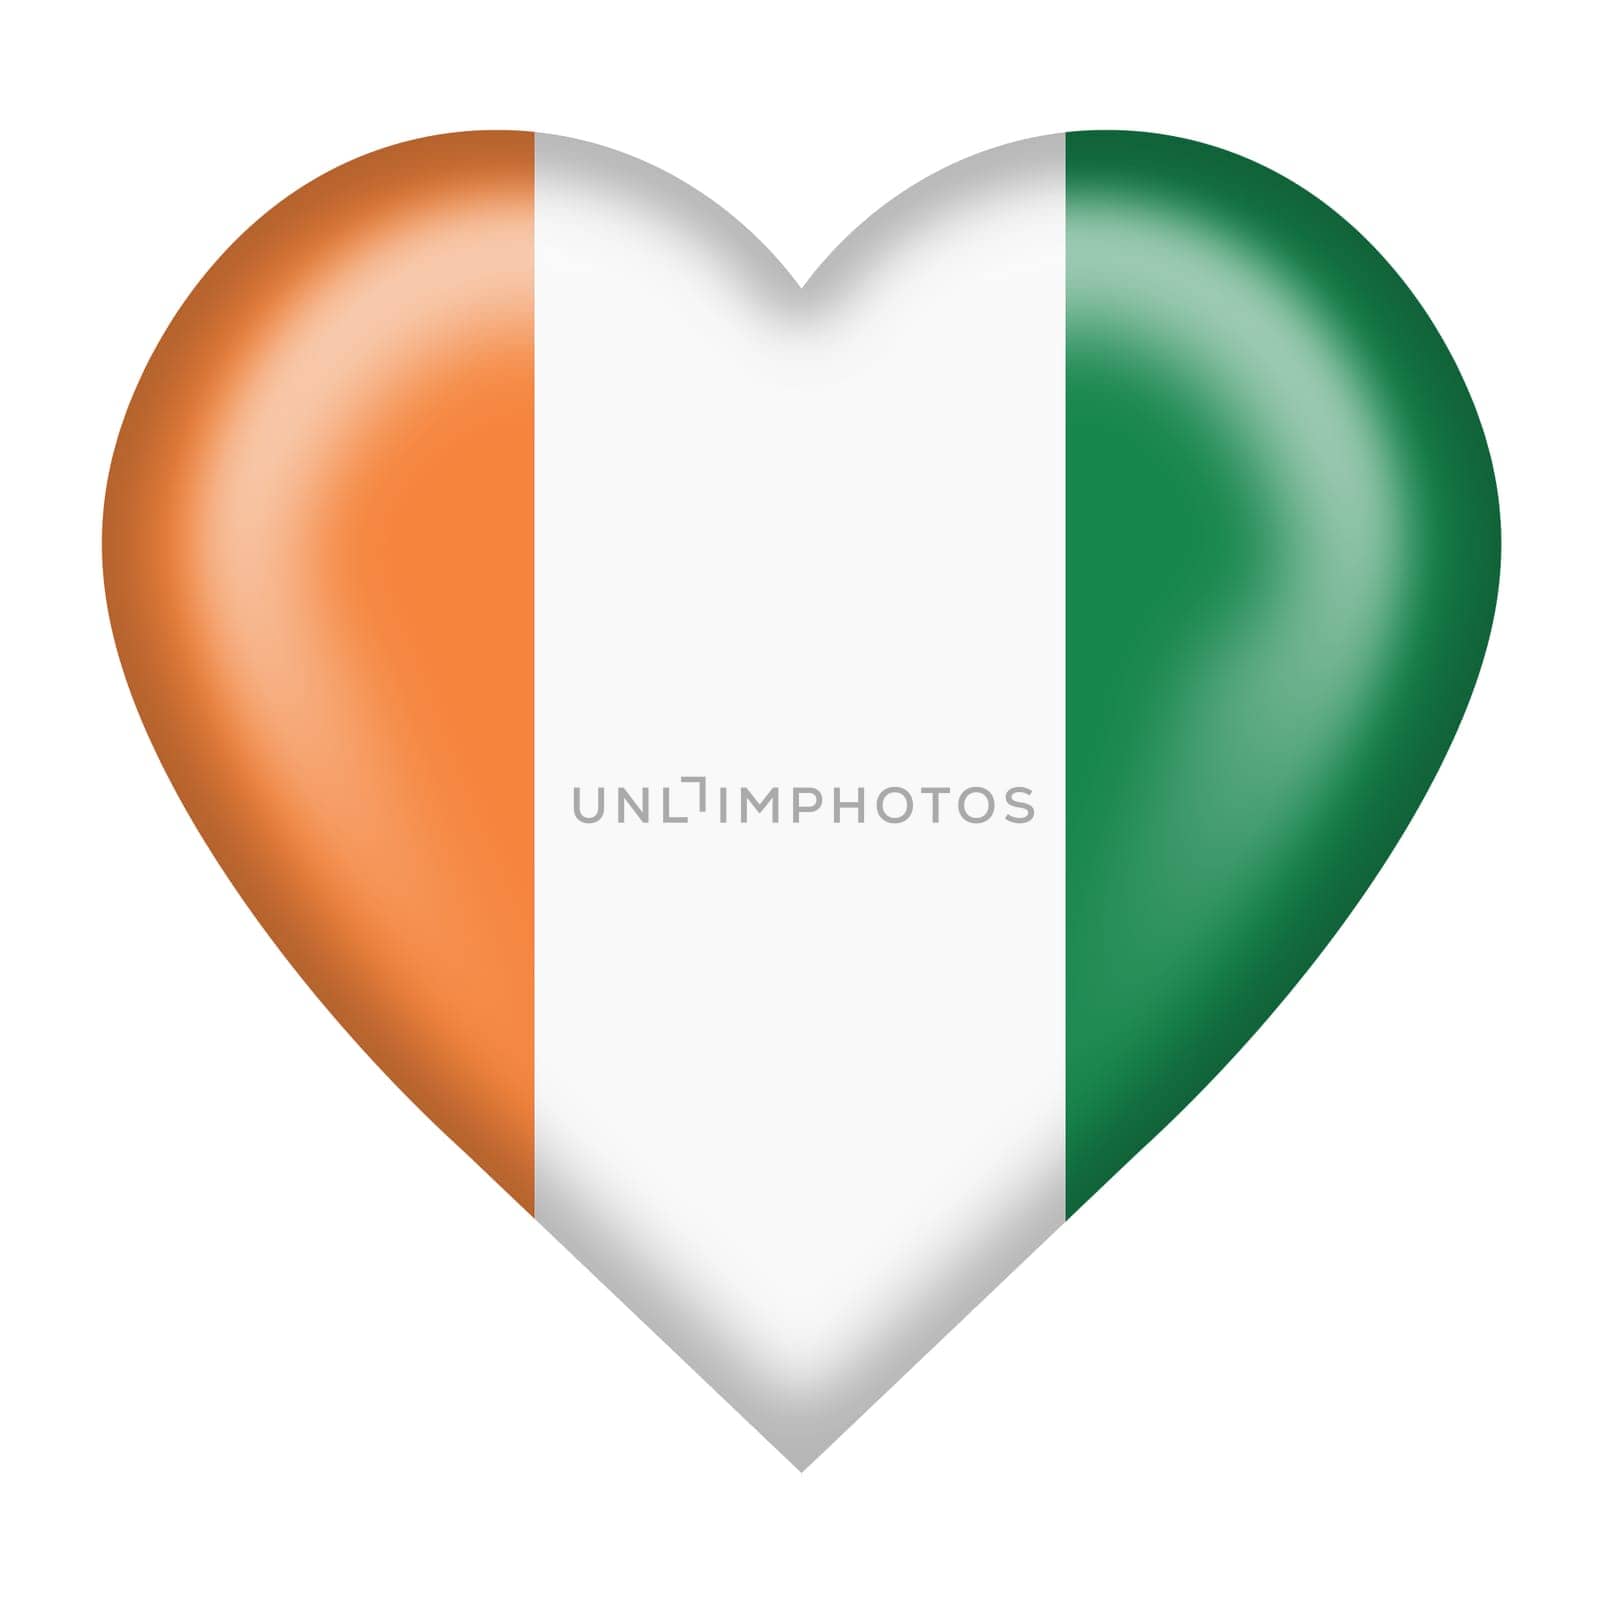 An Ivory Coast Cote dIvoire flag heart button with clipping path 3d illustration by VivacityImages